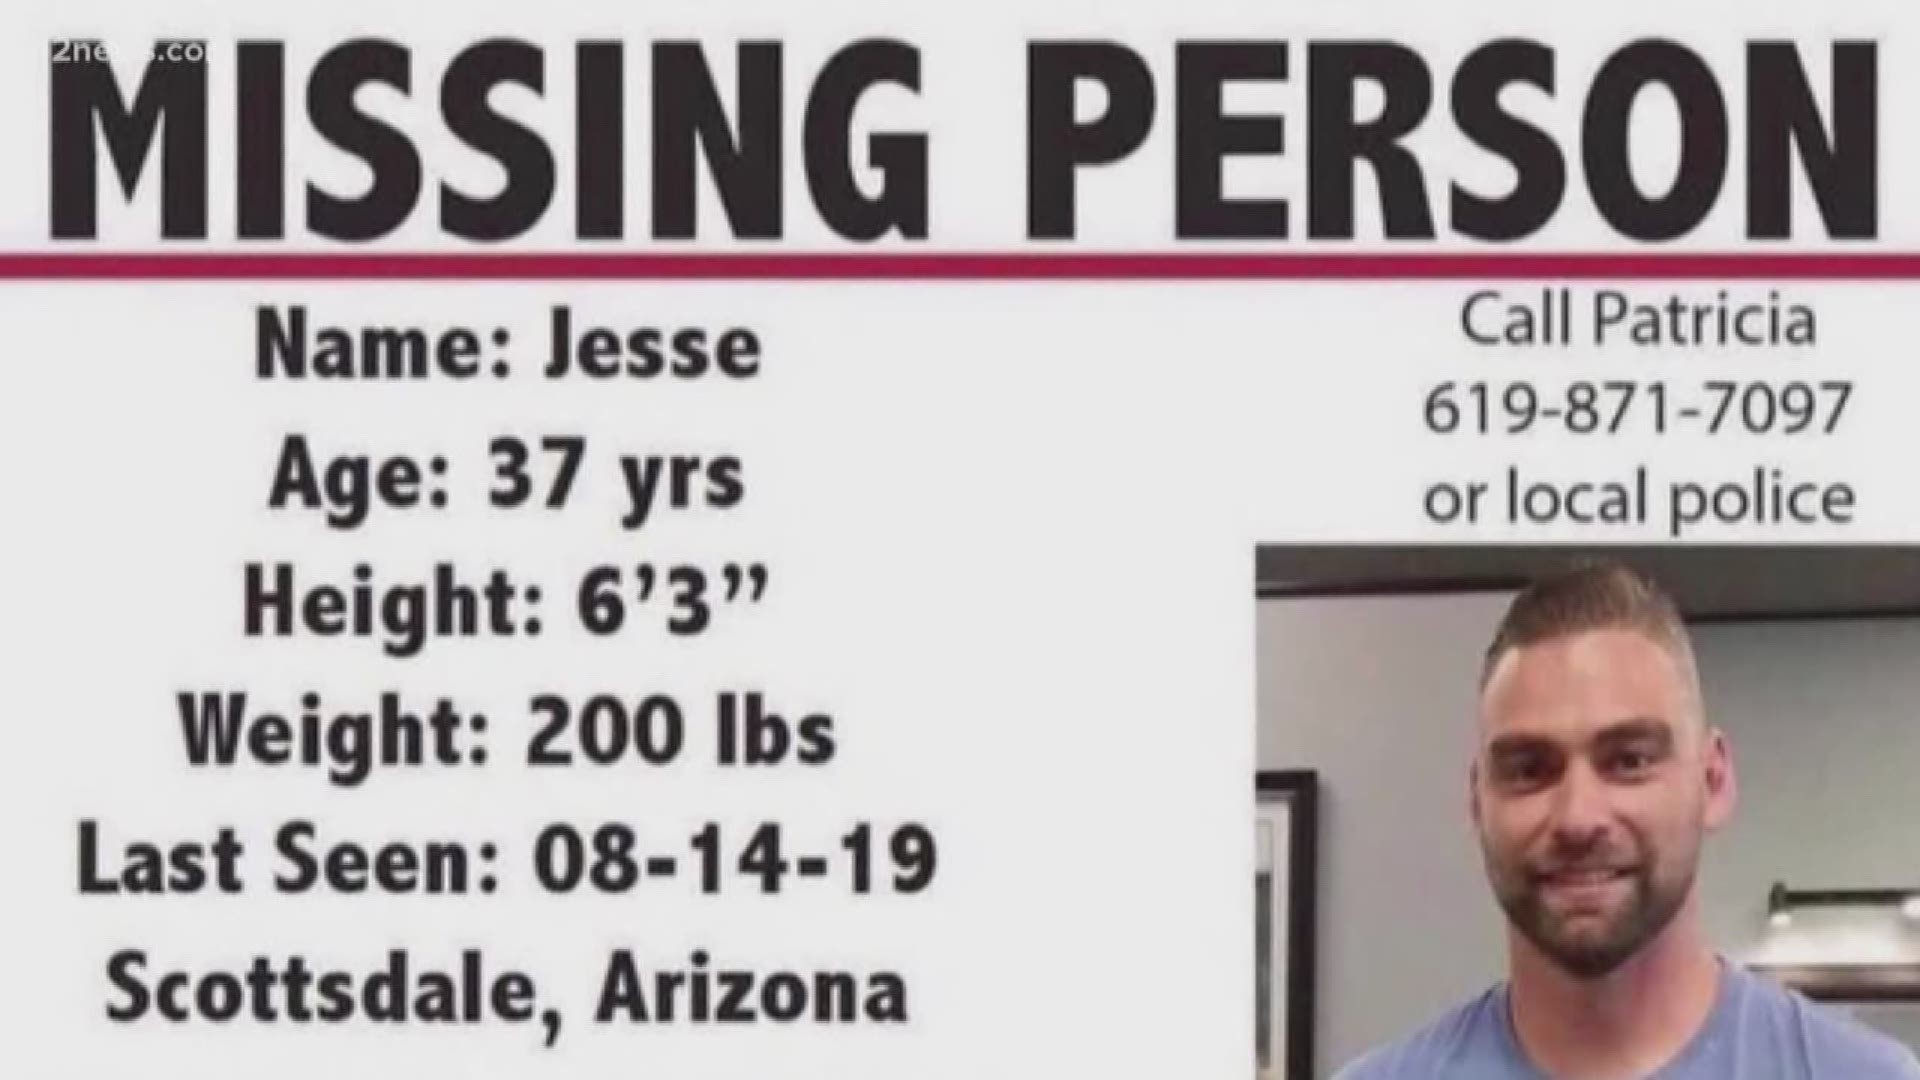 The search for a missing Marine continues, this time the search taking to the skies. The search is gaining national attention now as planes and helicopters are helping to locate Jesse Conger, 
a marine and search and rescue diver himself, who went missing from a Scottsdale apartment on August 14. A $30,000 reward is being offered to help locate Jesse.